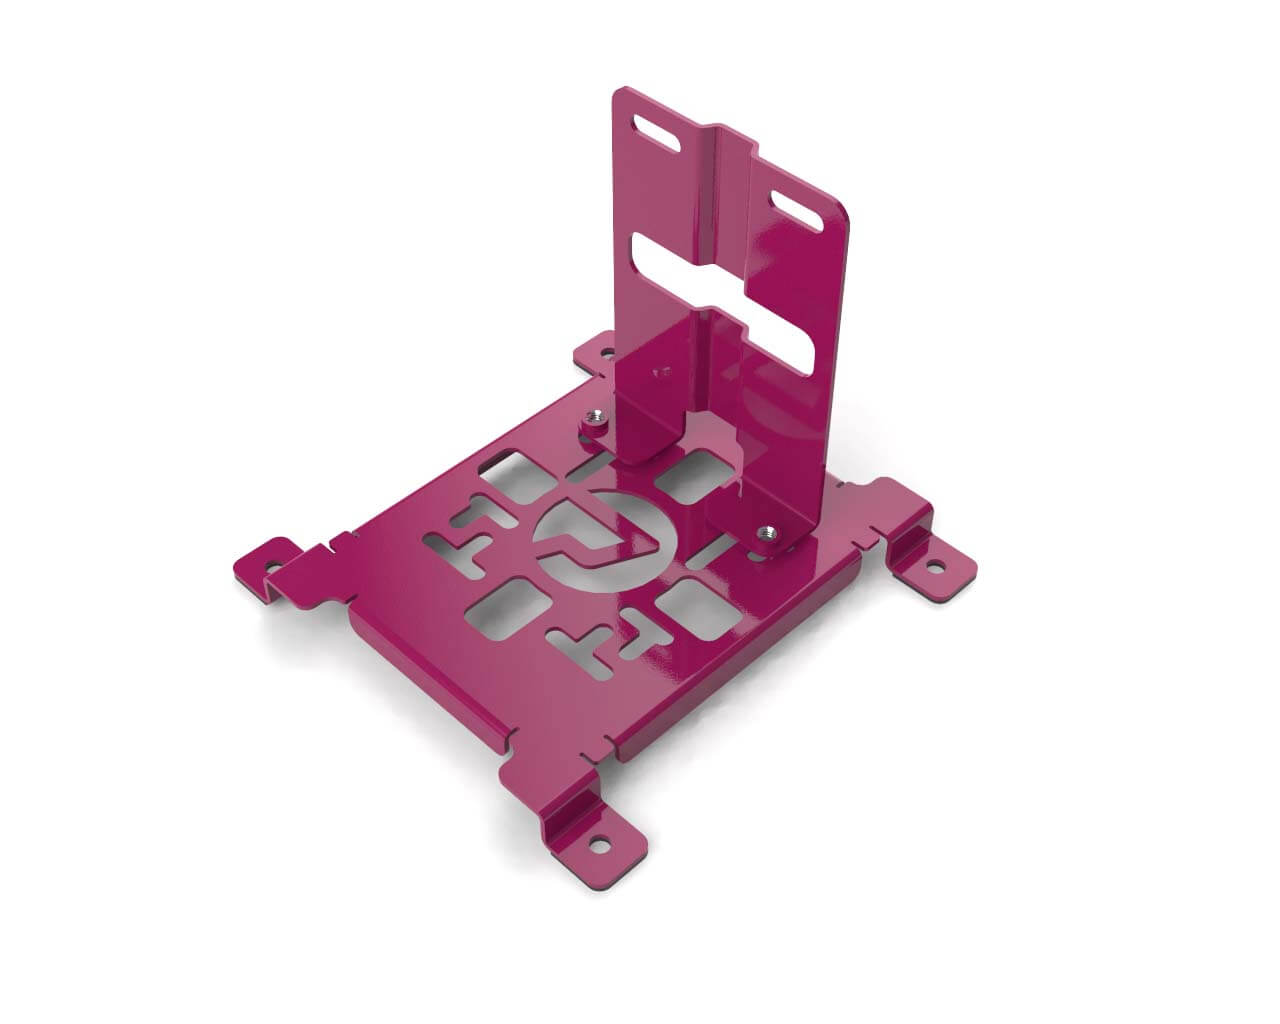 PrimoChill SX CTR2 Spider Mount Bracket Kit - 120mm Series - PrimoChill - KEEPING IT COOL Magenta